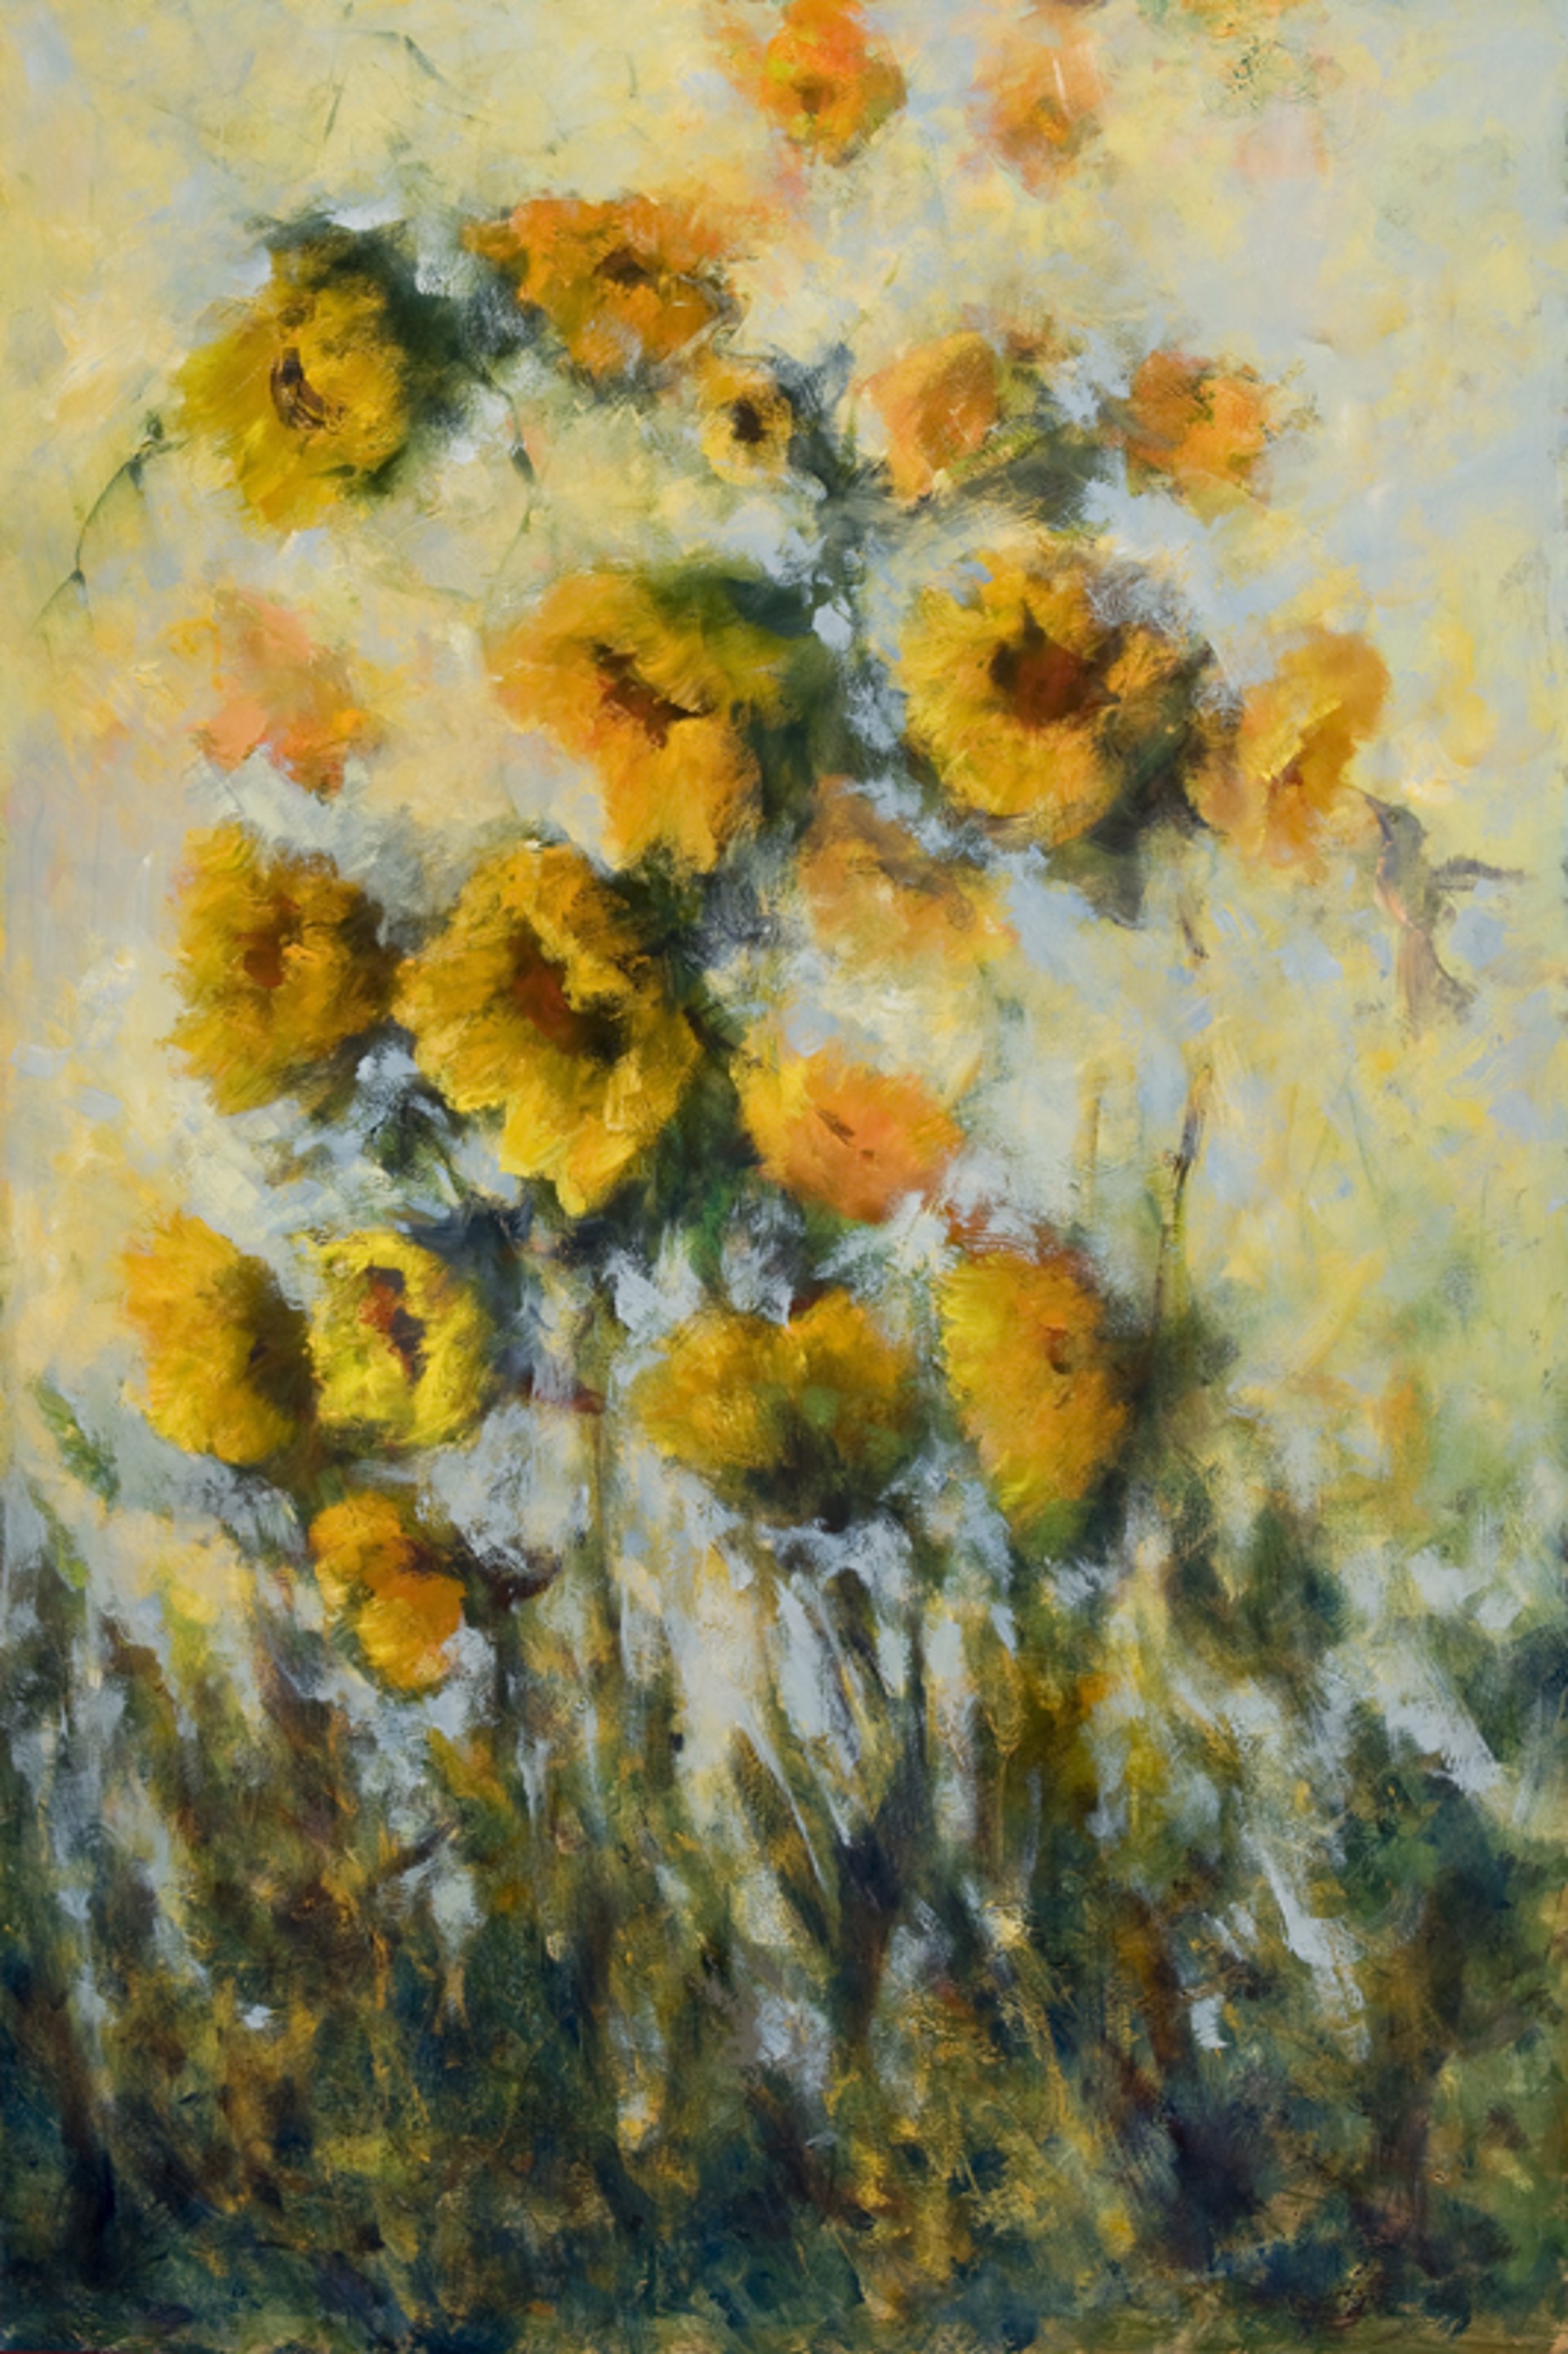 Dance of the Sunflowers by Mary Garrish